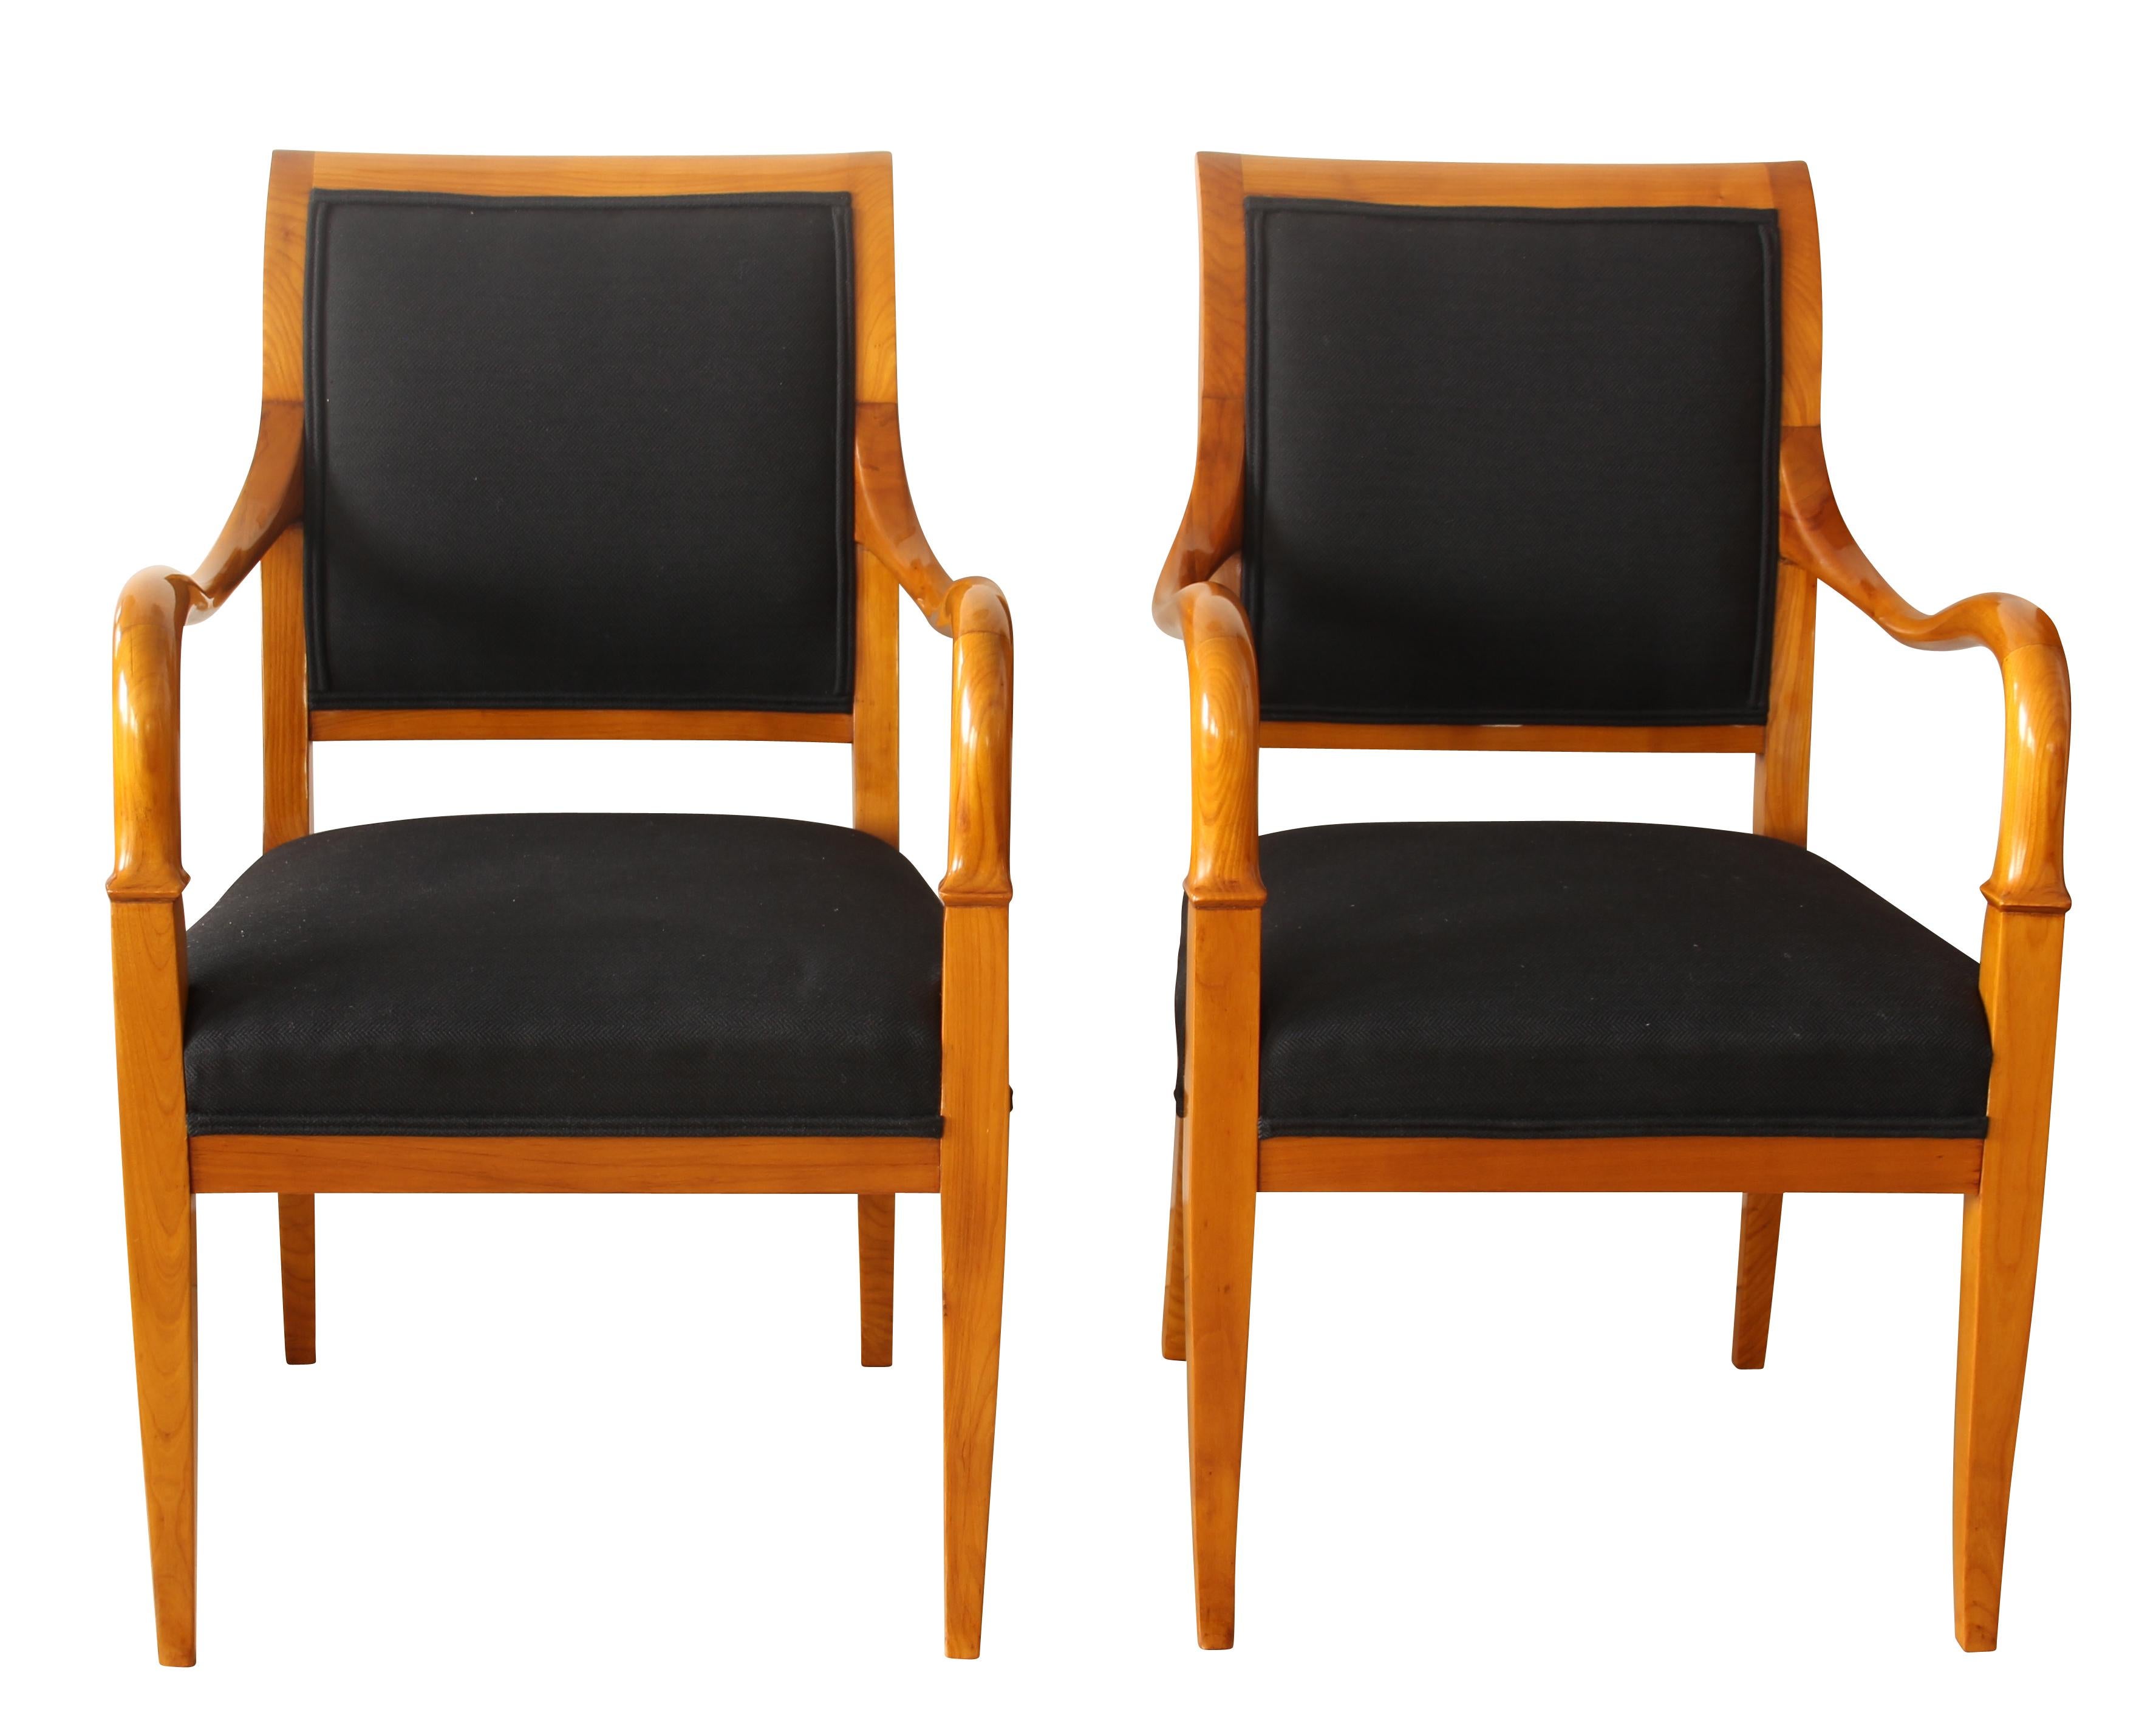 One pair of elegant and comfortable Biedermeier armchairs from South Germany, circa 1830.
The chairs are made of wonderfully curved cherry solid wood, that has been hand-polished in shellac by us.
The new upholstery fabric is made of a Classic